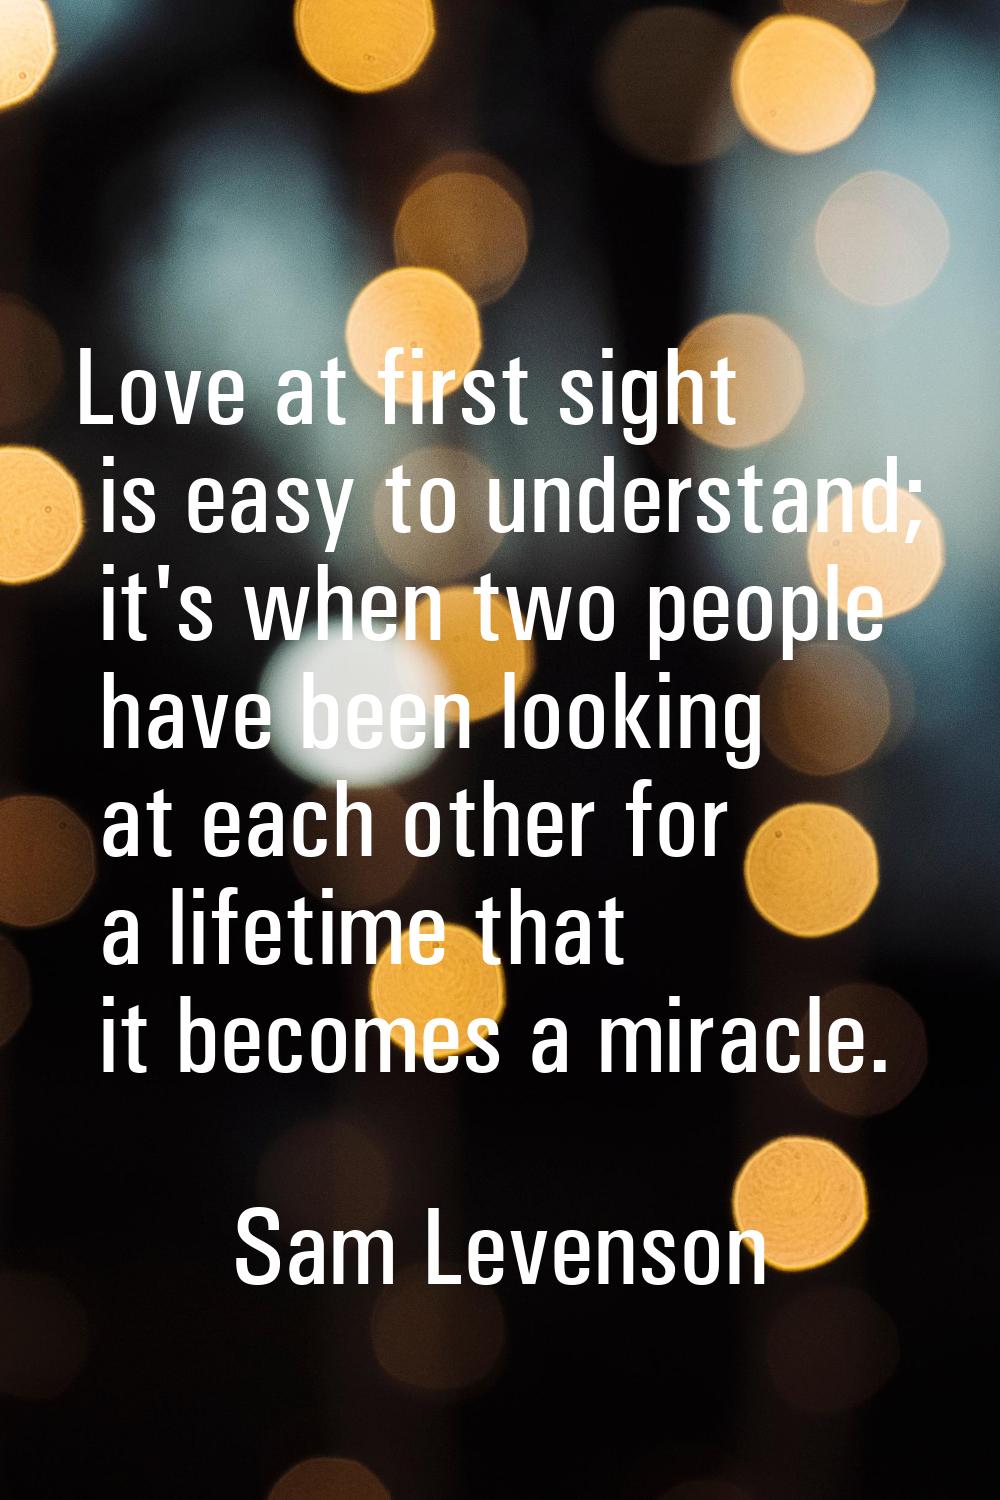 Love at first sight is easy to understand; it's when two people have been looking at each other for